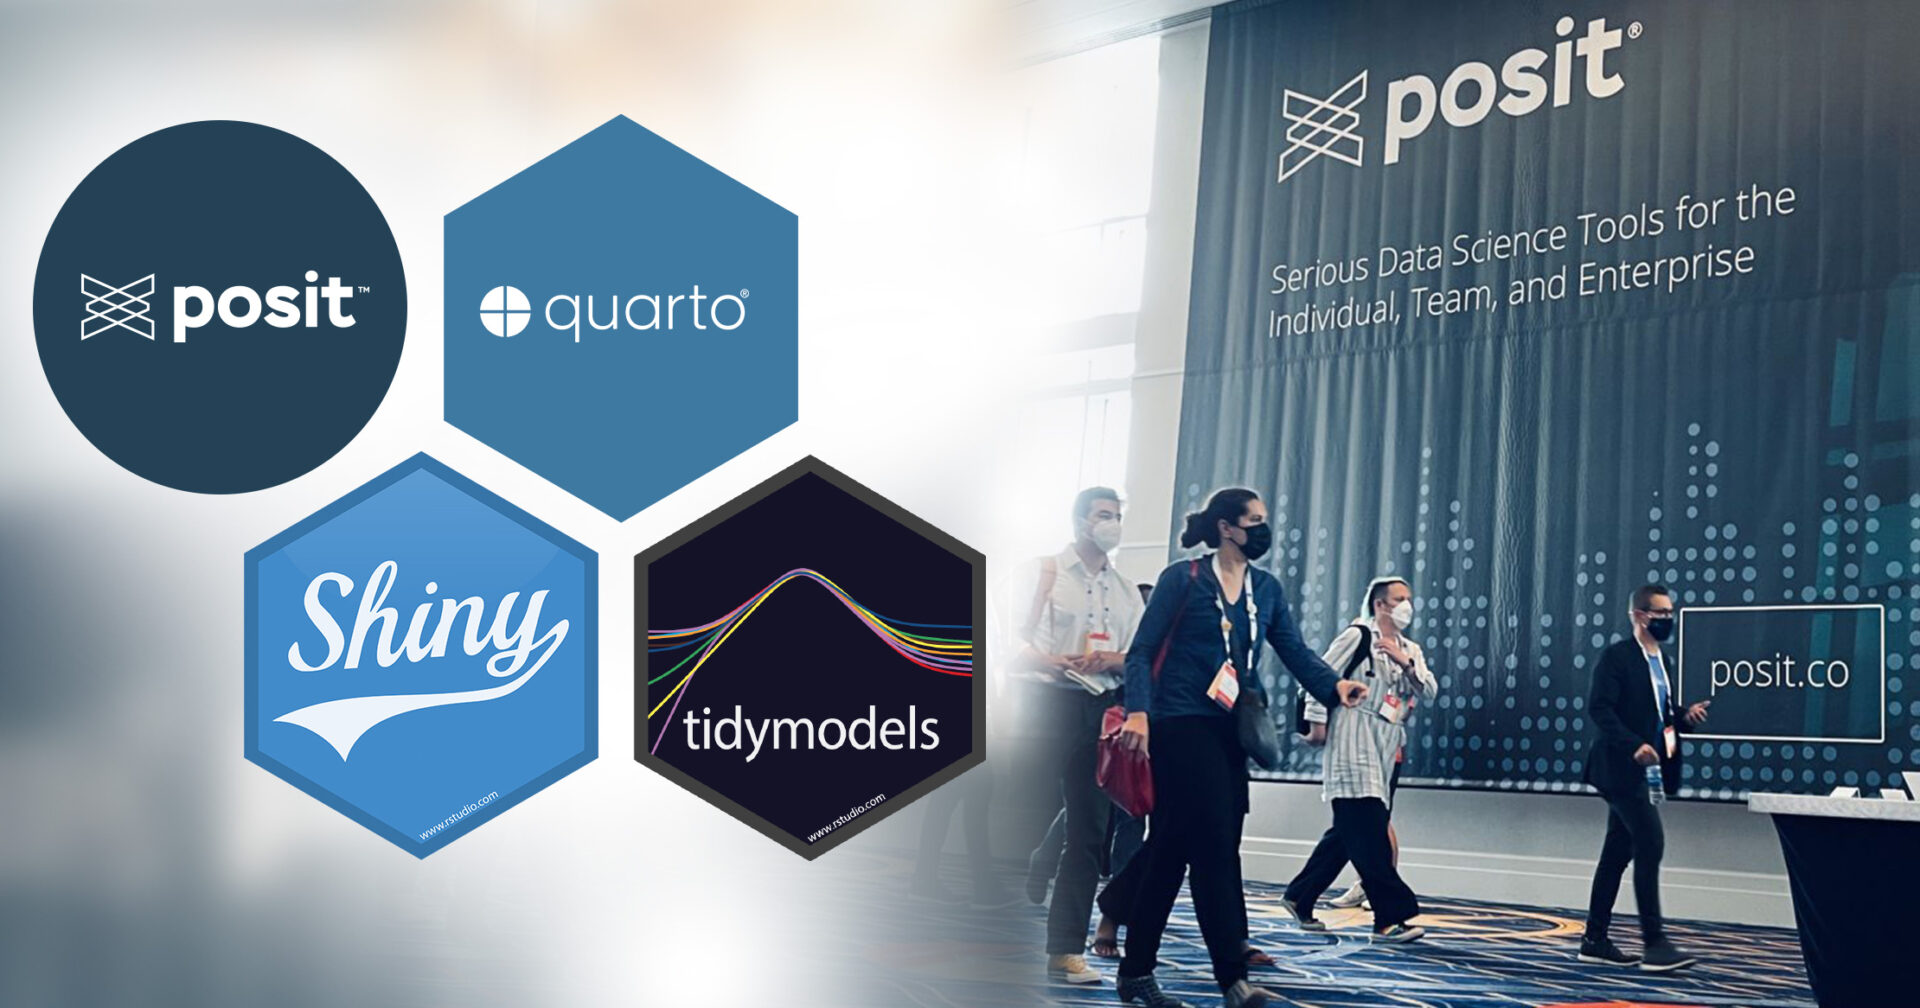 On the left, four images consisting of the Posit logo, Quarto, Shiny, and tidymodels. On the right, a group of people walk in front of a Posit banner that says Serious Data Science Tools for the Individual, Team, and Enterprise.